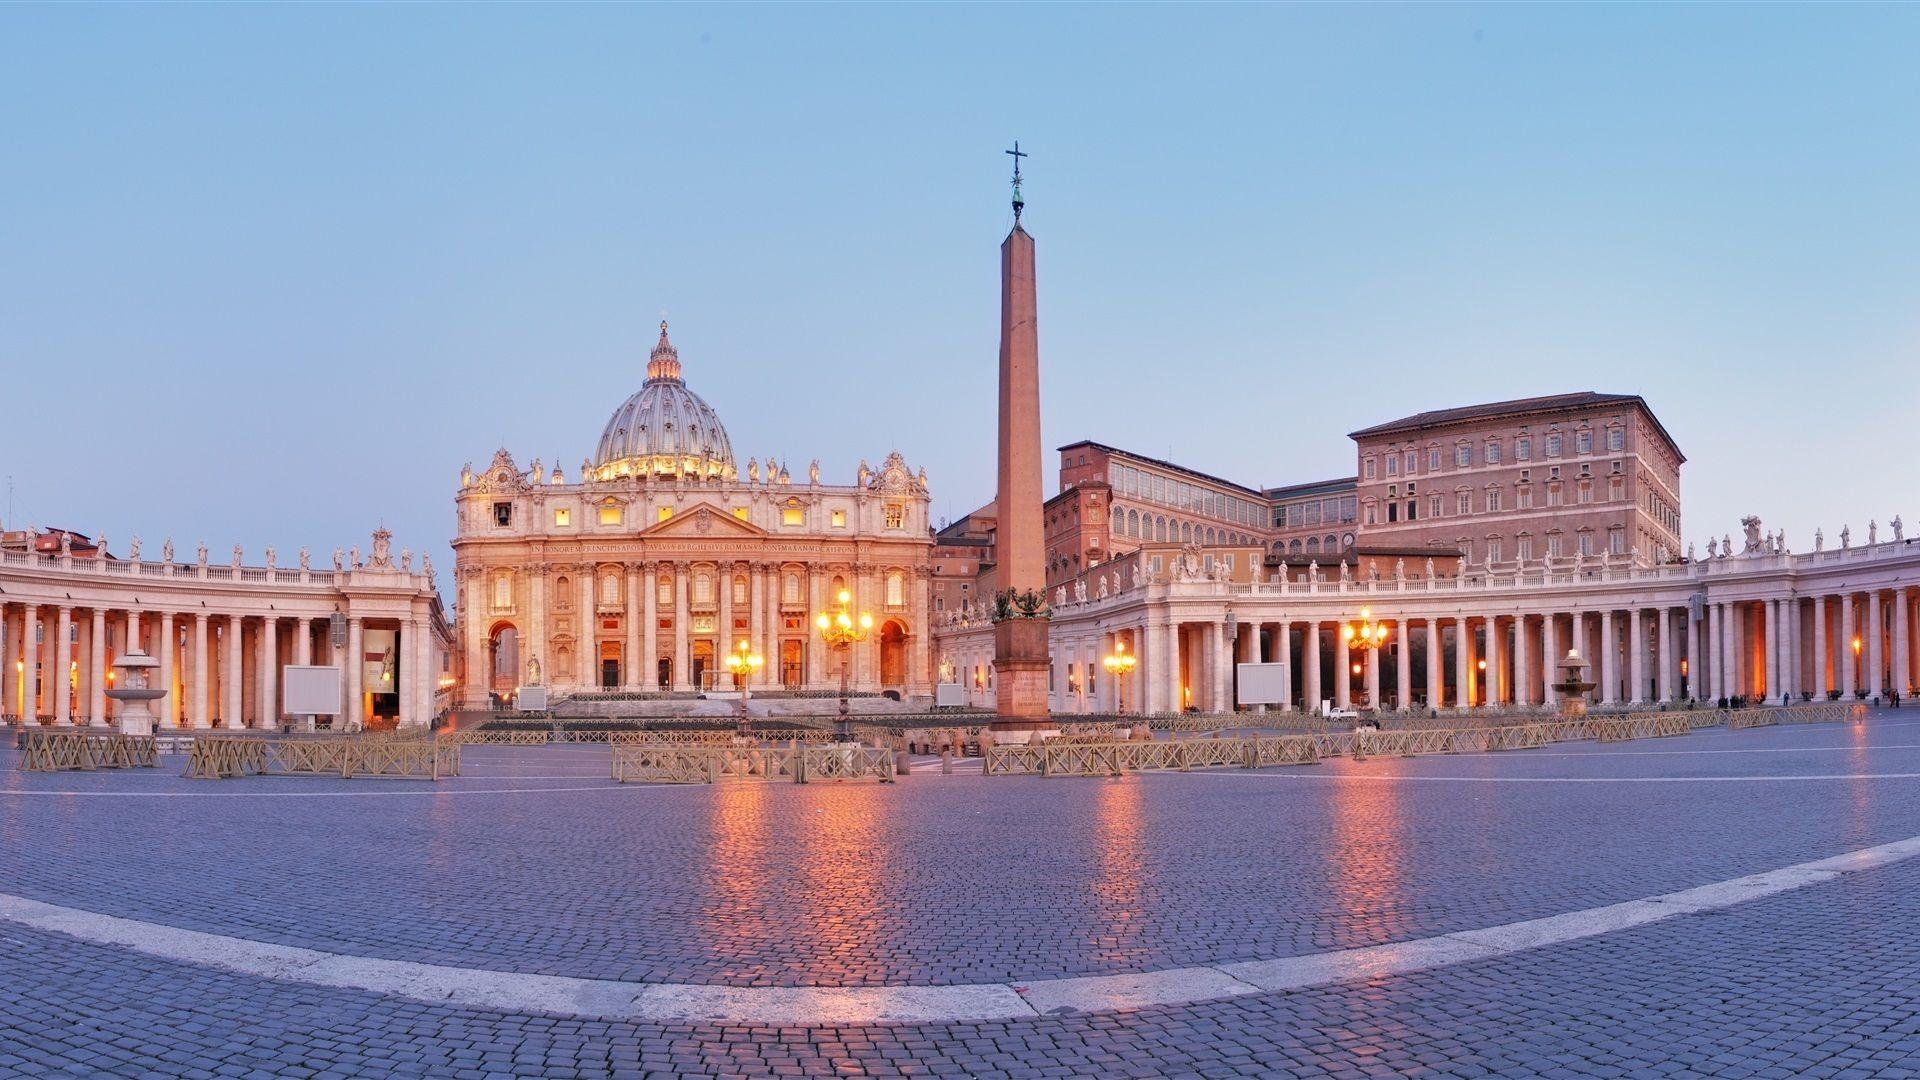 City Square: St. Peter's Plaza, Egyptian Obelisk, The Papal Basilica of Saint Peter in the Vatican, Vatican City. 1920x1080 Full HD Wallpaper.